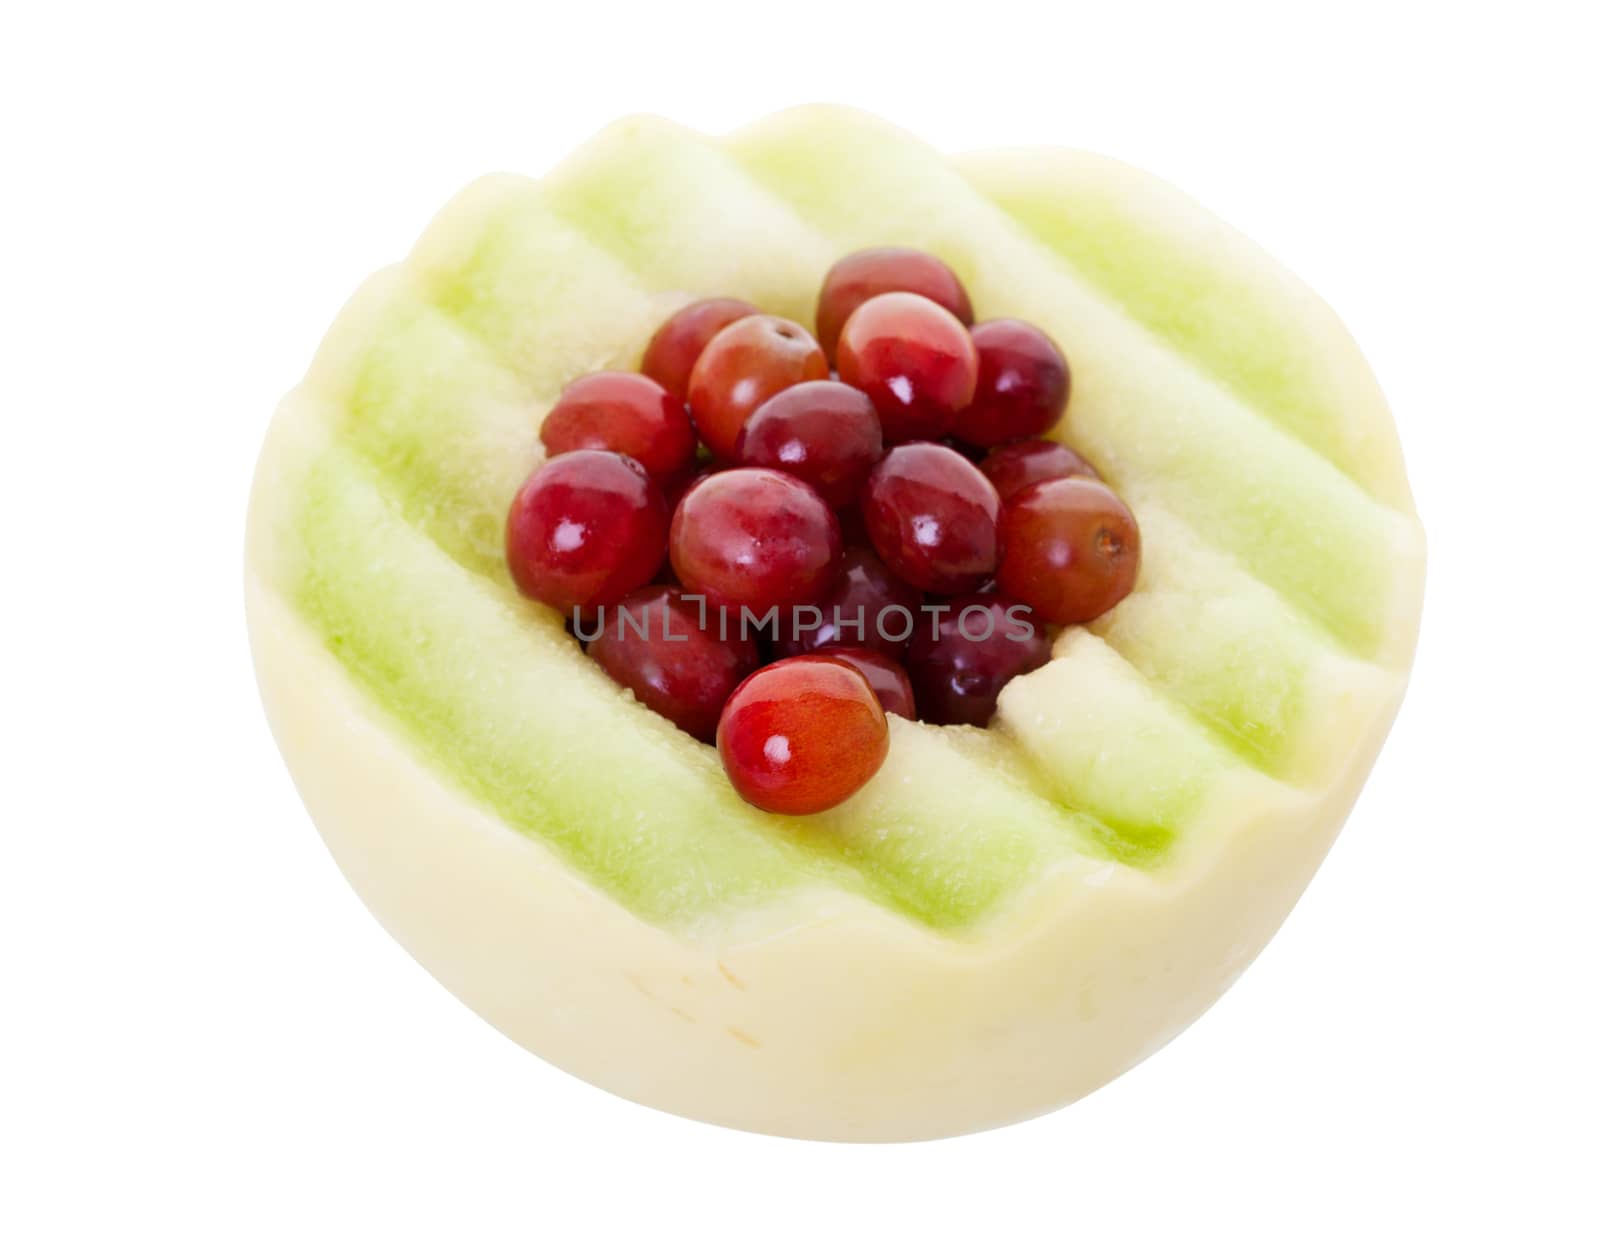 Half of a honeydew melon stuffed with fresh red grapes.  Shot on white background.  With clipping path.